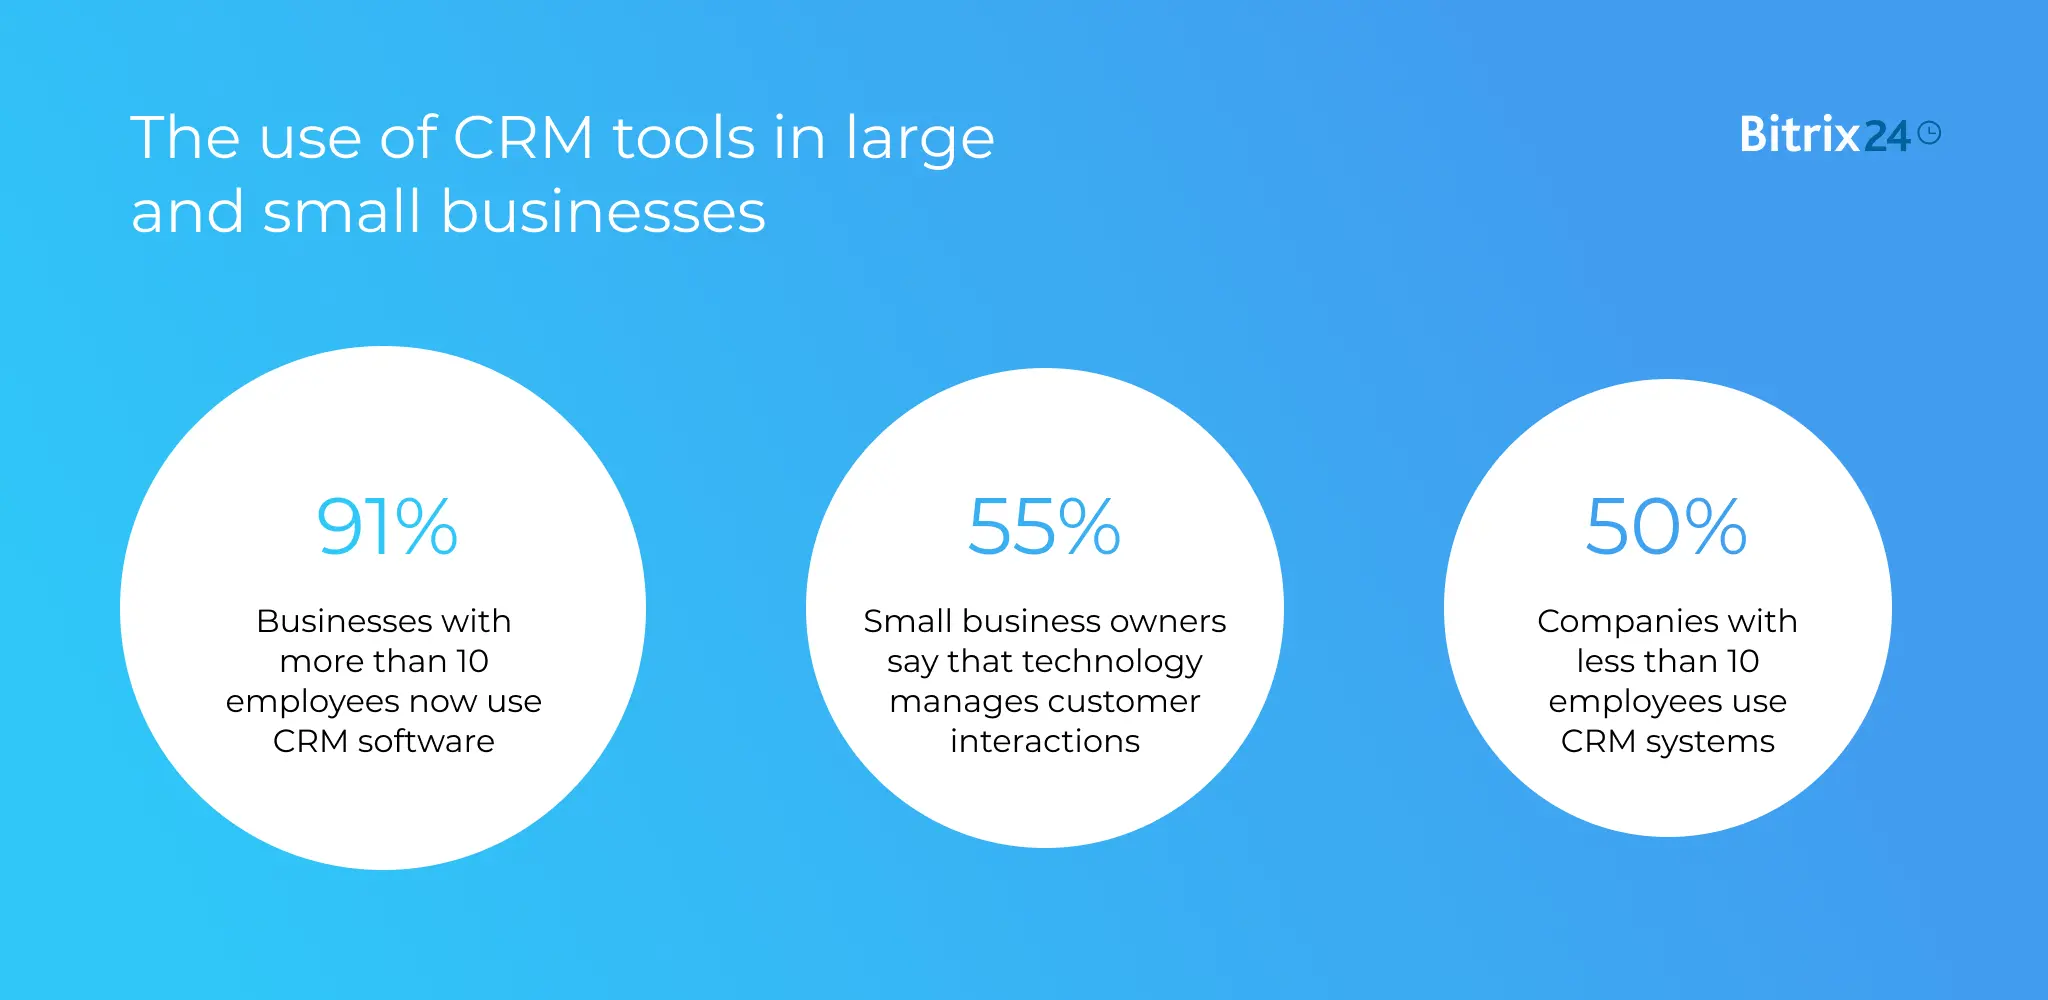 The use of CRM tools in large and small businesses